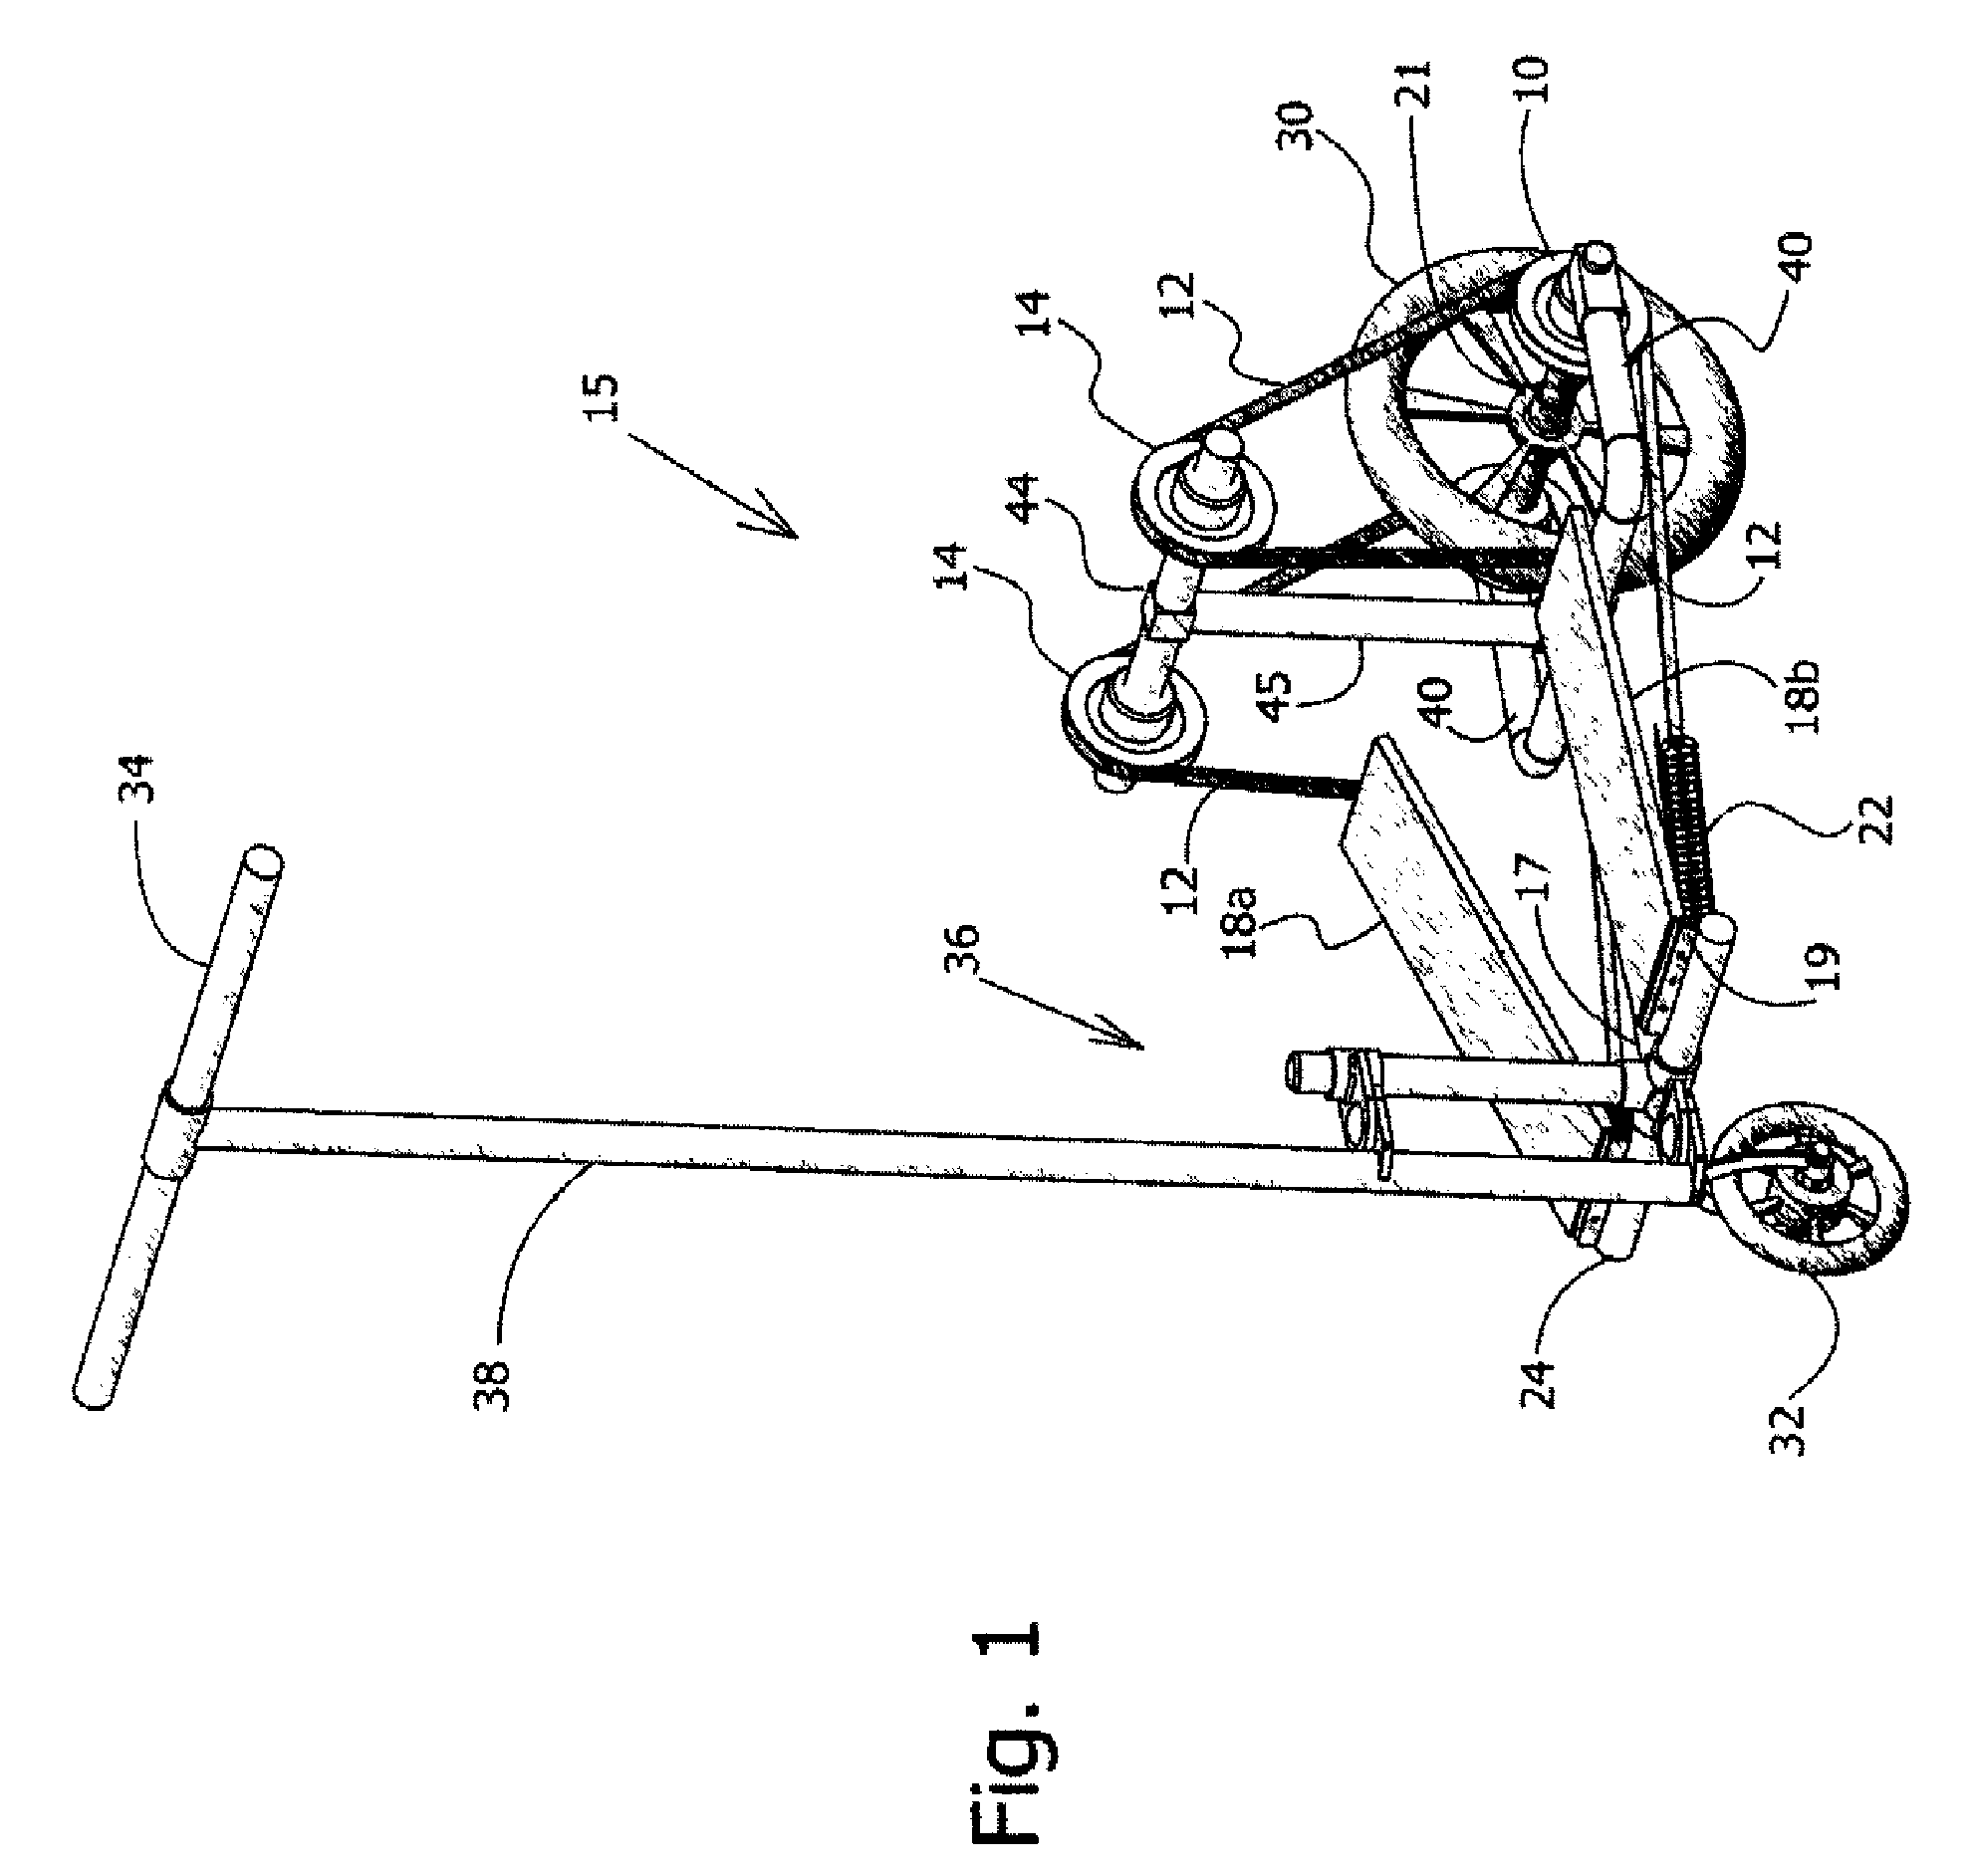 Body weight-activated scooter